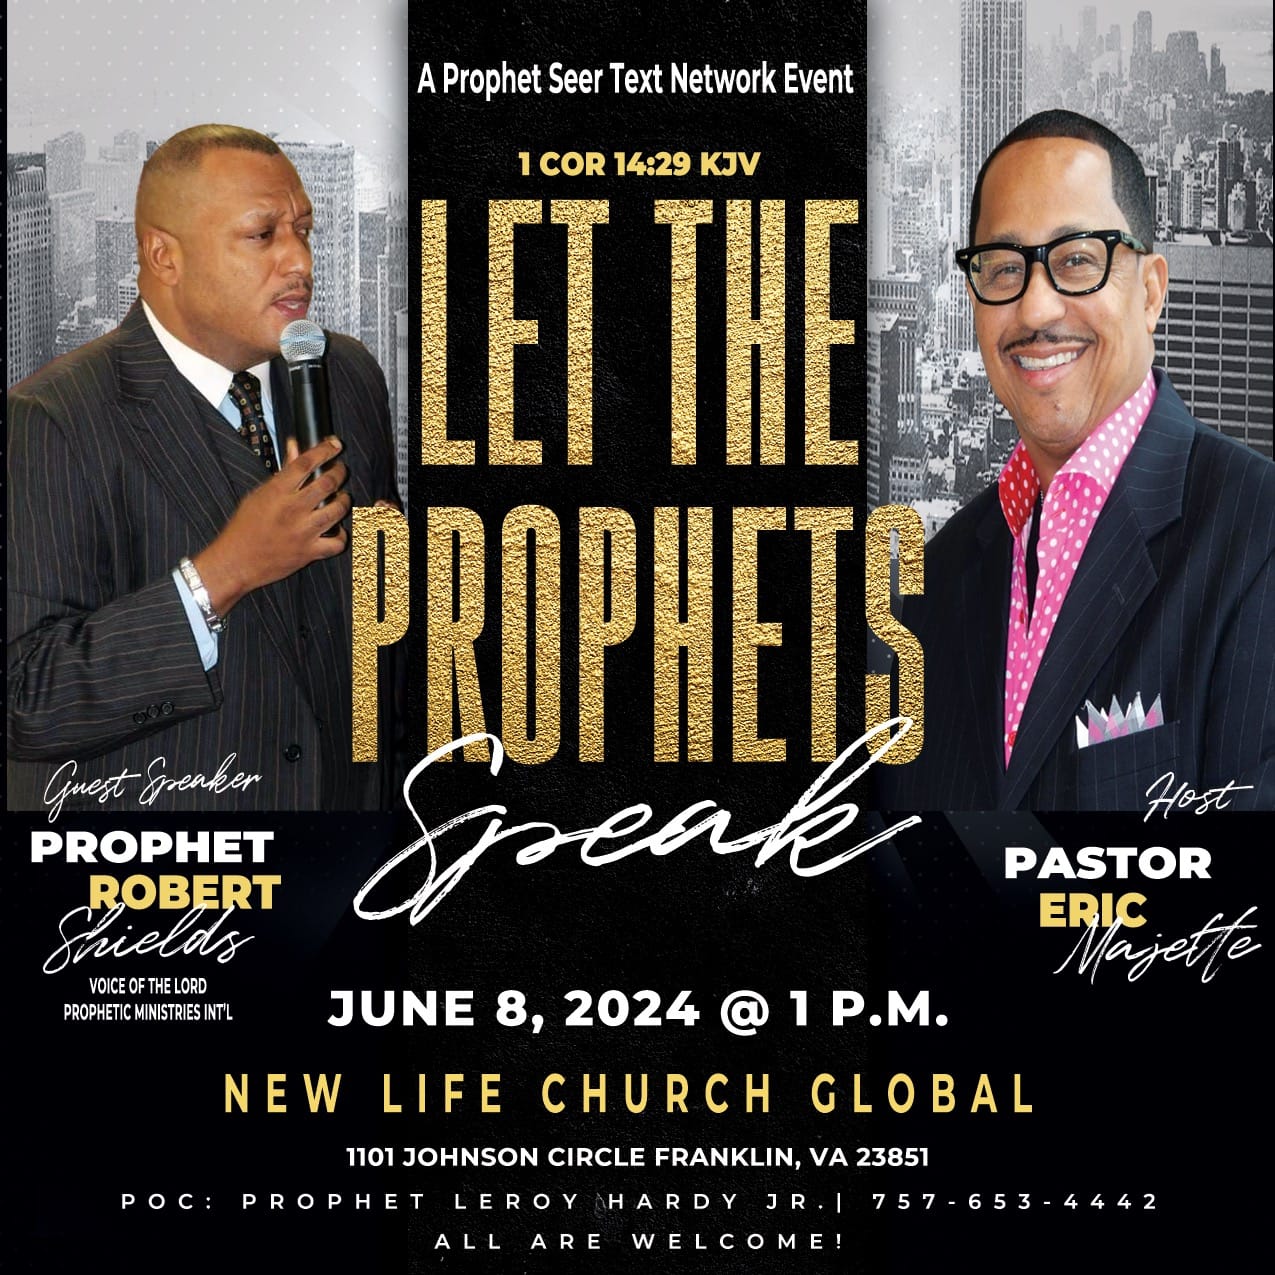 Let the Prophets Speak - featuring Prophet Robert Banks and Eric Majette. June 8, 2024 @ New Life Church Global